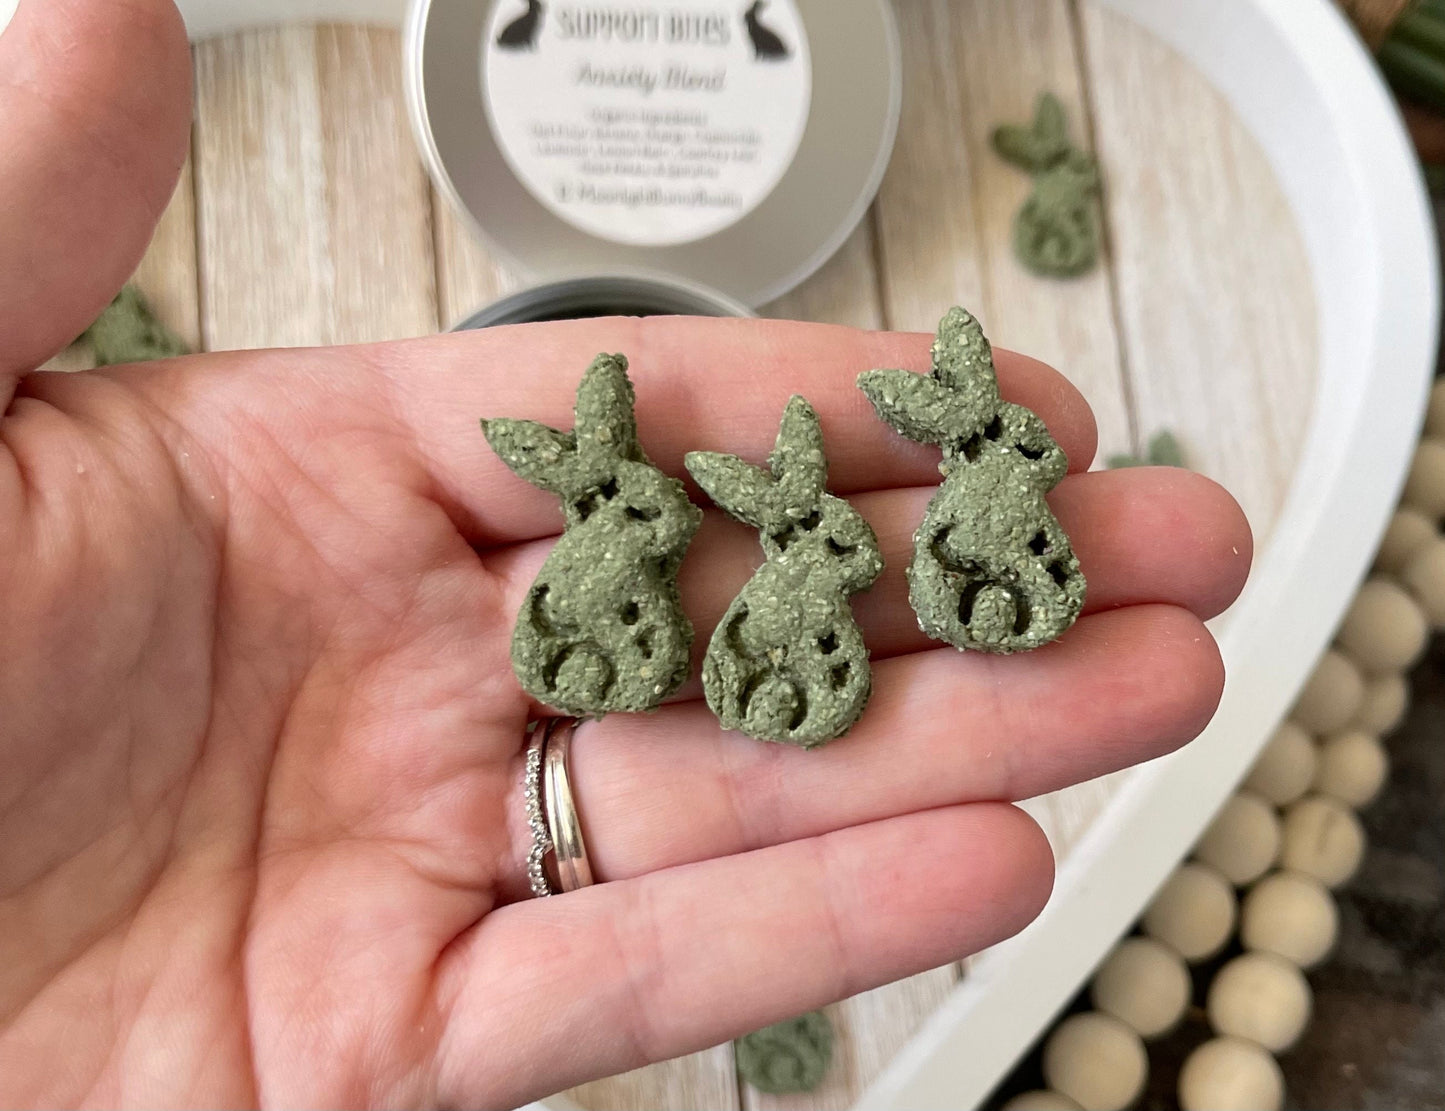 Celestial Bunny Support Bites~Anxiety Blend~bite sized supportive health treats to alleviate anxiety+stress for rabbits and small animals